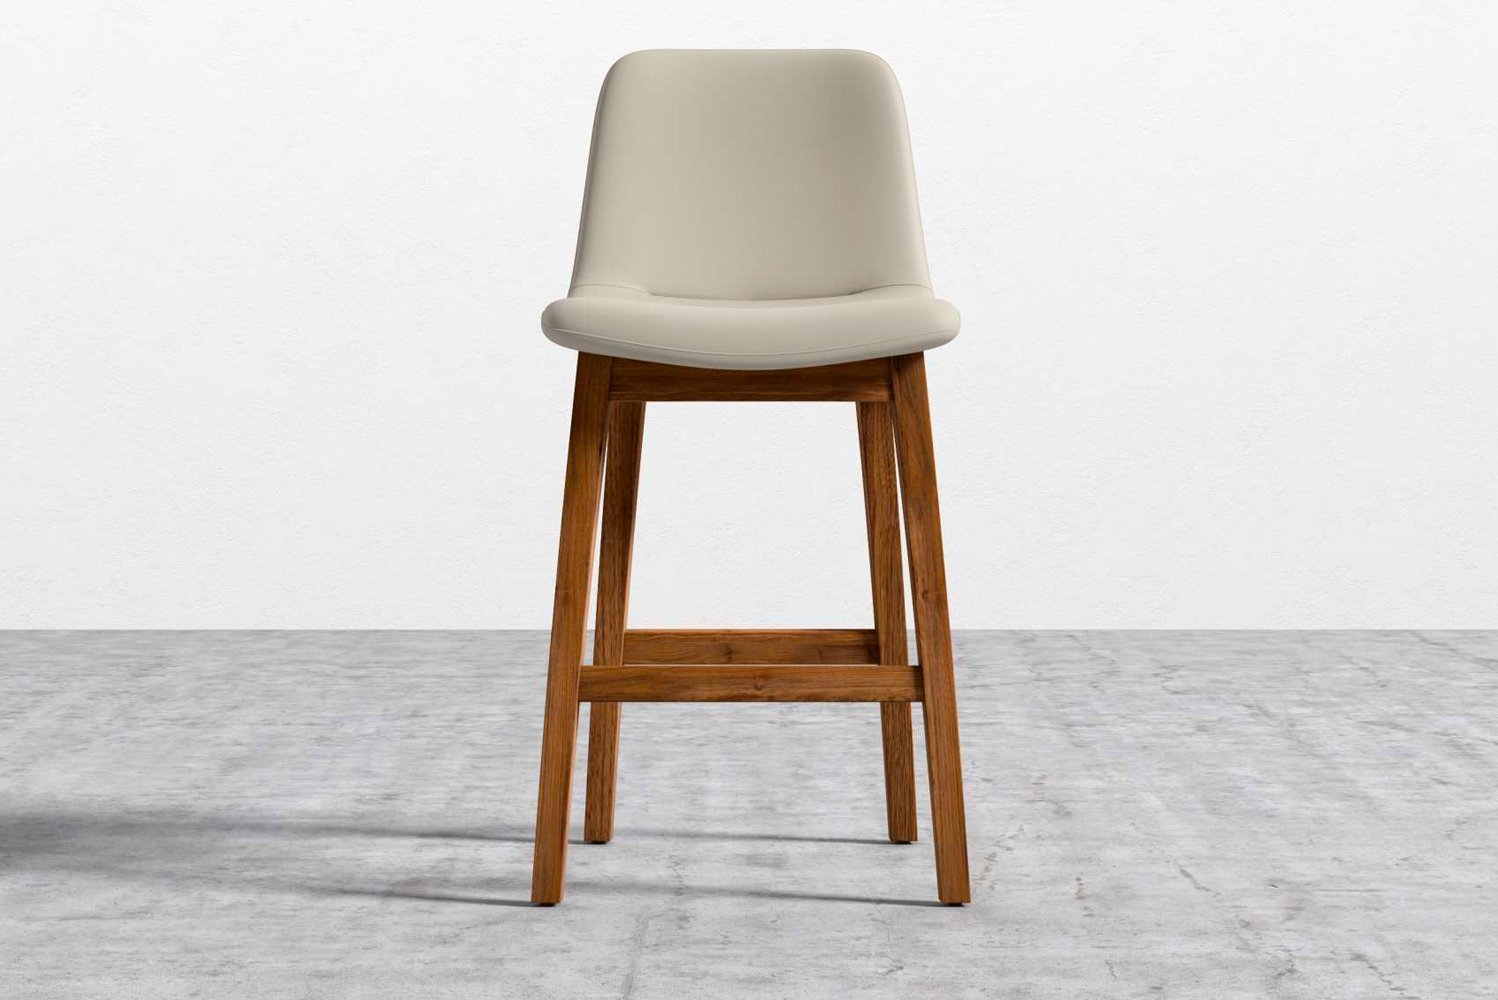 Introducing the Aubrey counter stool inspired by the Aubrey armchair and side chair 